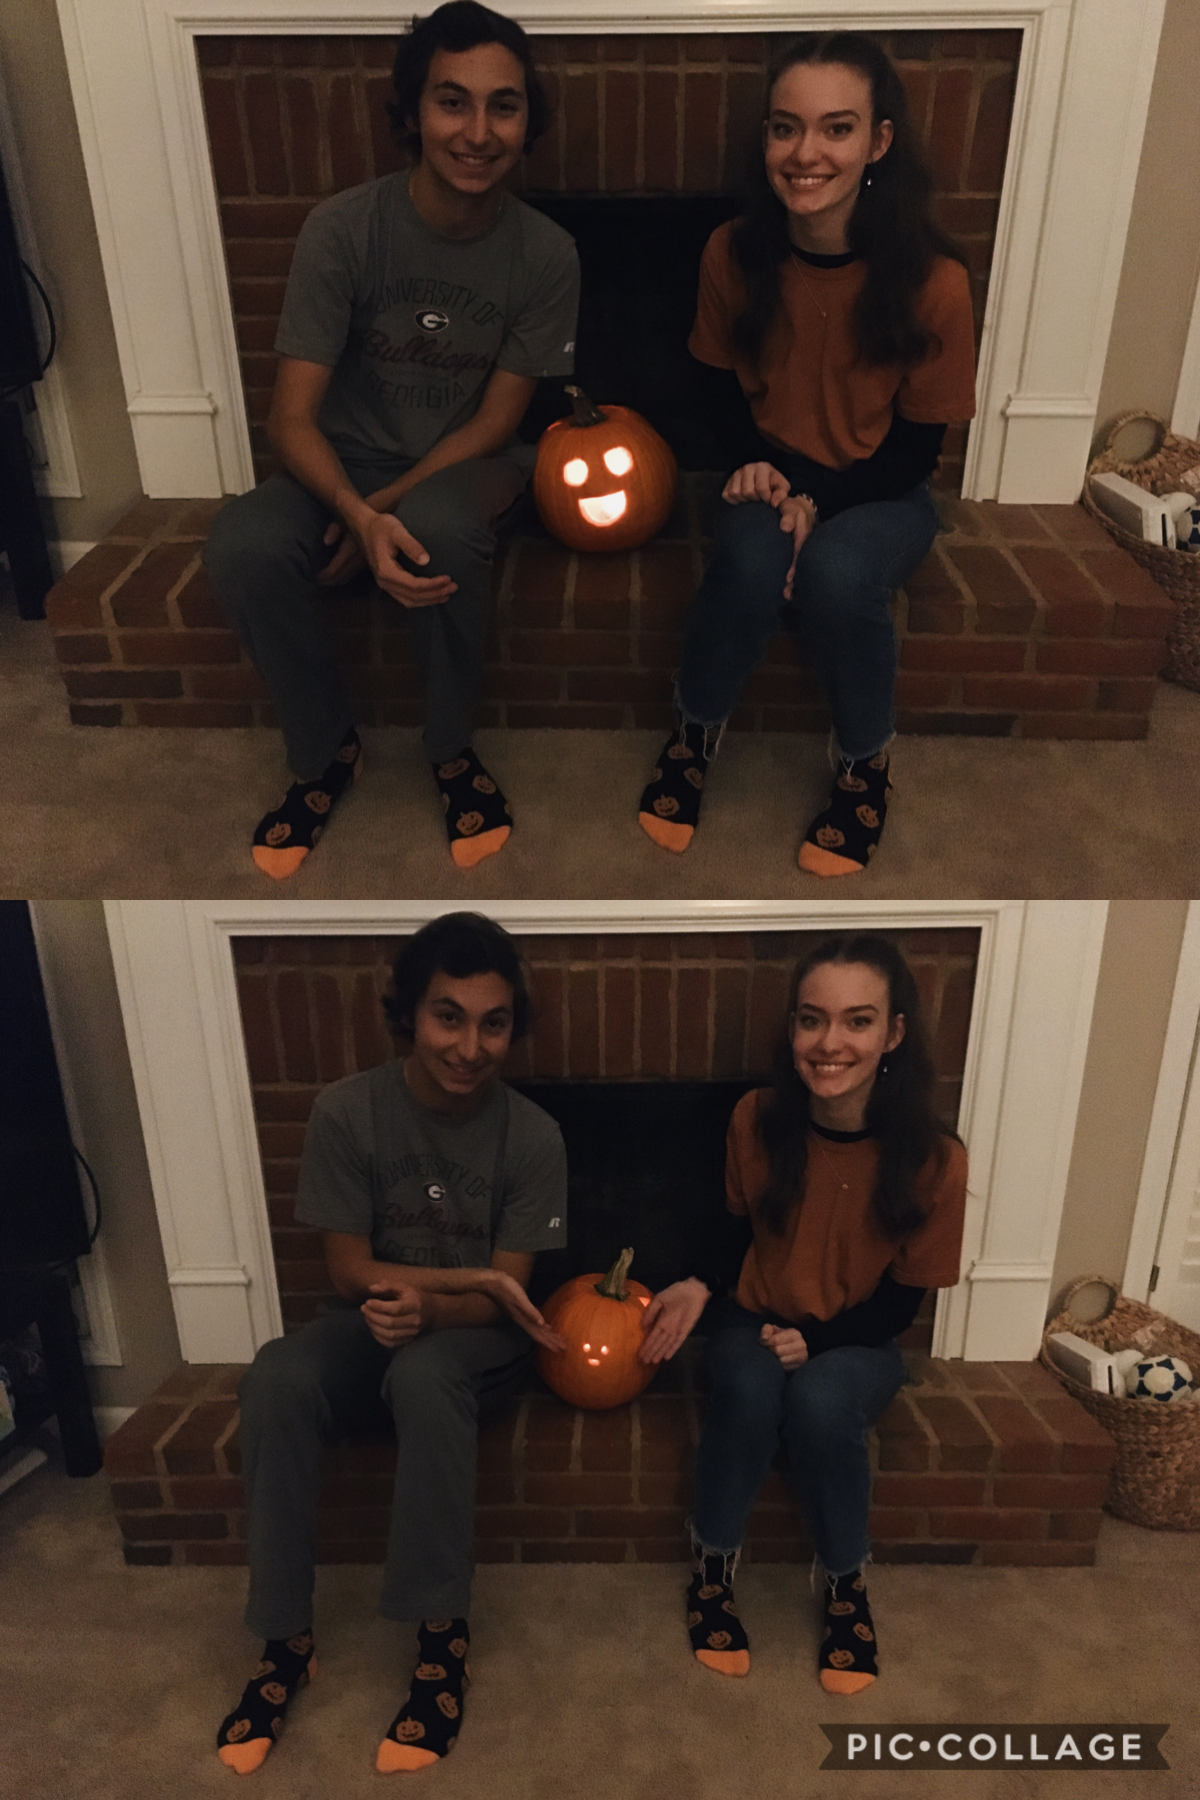 look at james and i’s jack o lantern from Halloween!! his sister and her friends were there doing some as well and they had a contest and gave prizes and our pumpkin won “most scary” 😂 also look James has been growing out his hair and it looks so gooddddd